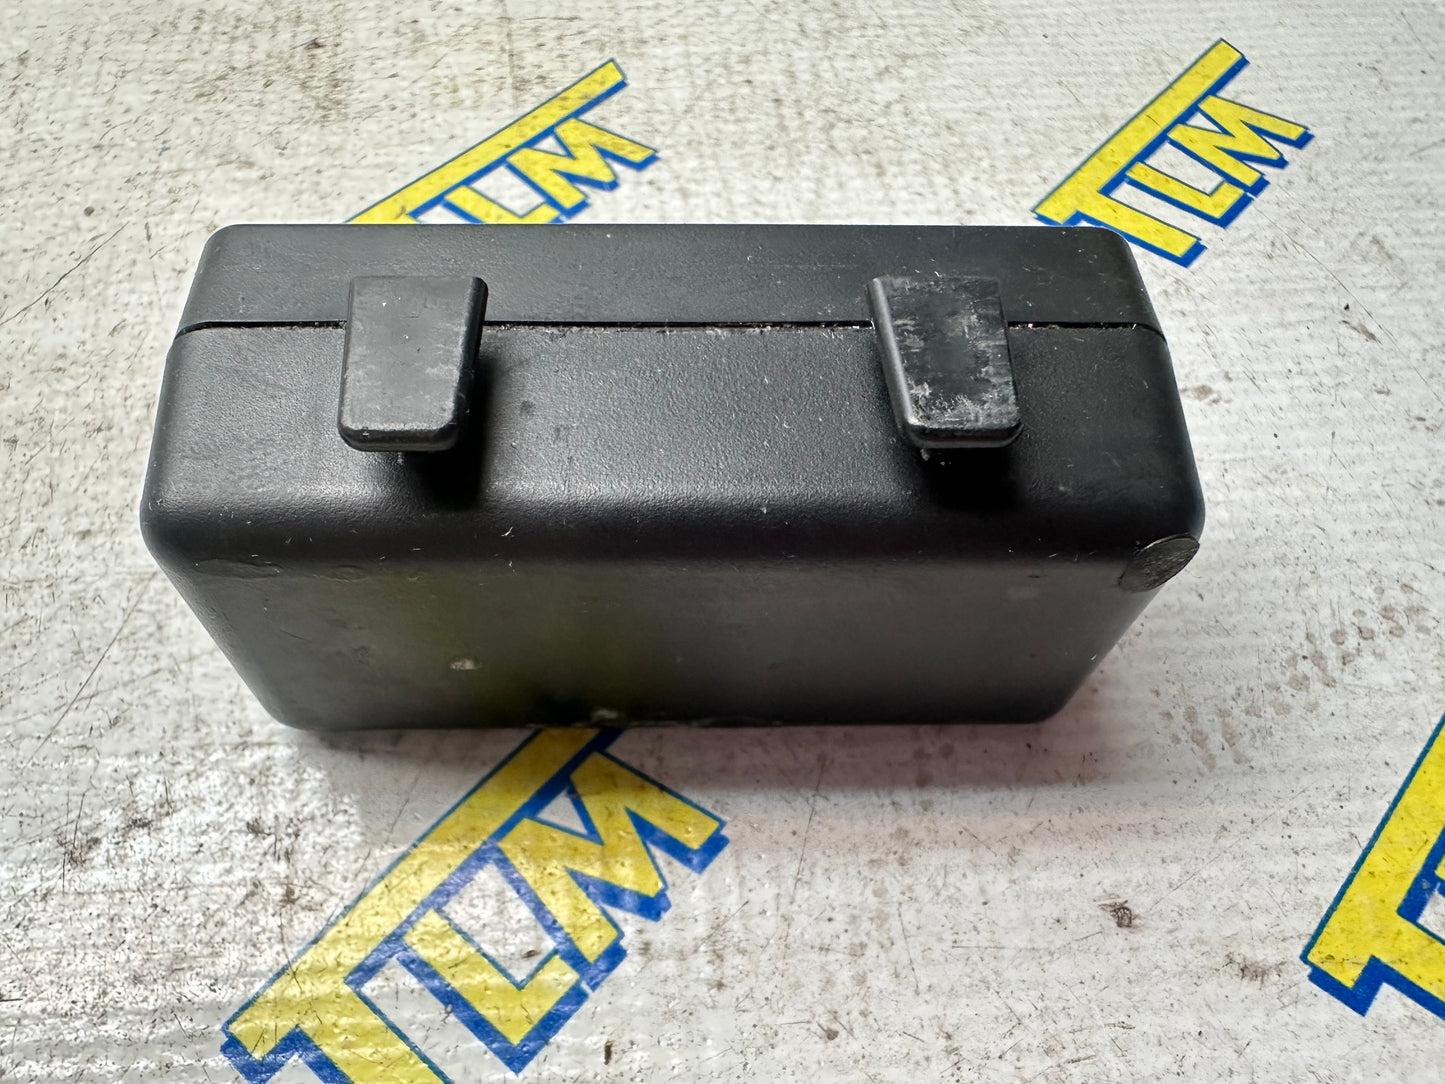 04-08 Acura TL Coin Holder Change Piggy Bank Center Console 2004 05 06 07 08 OEM